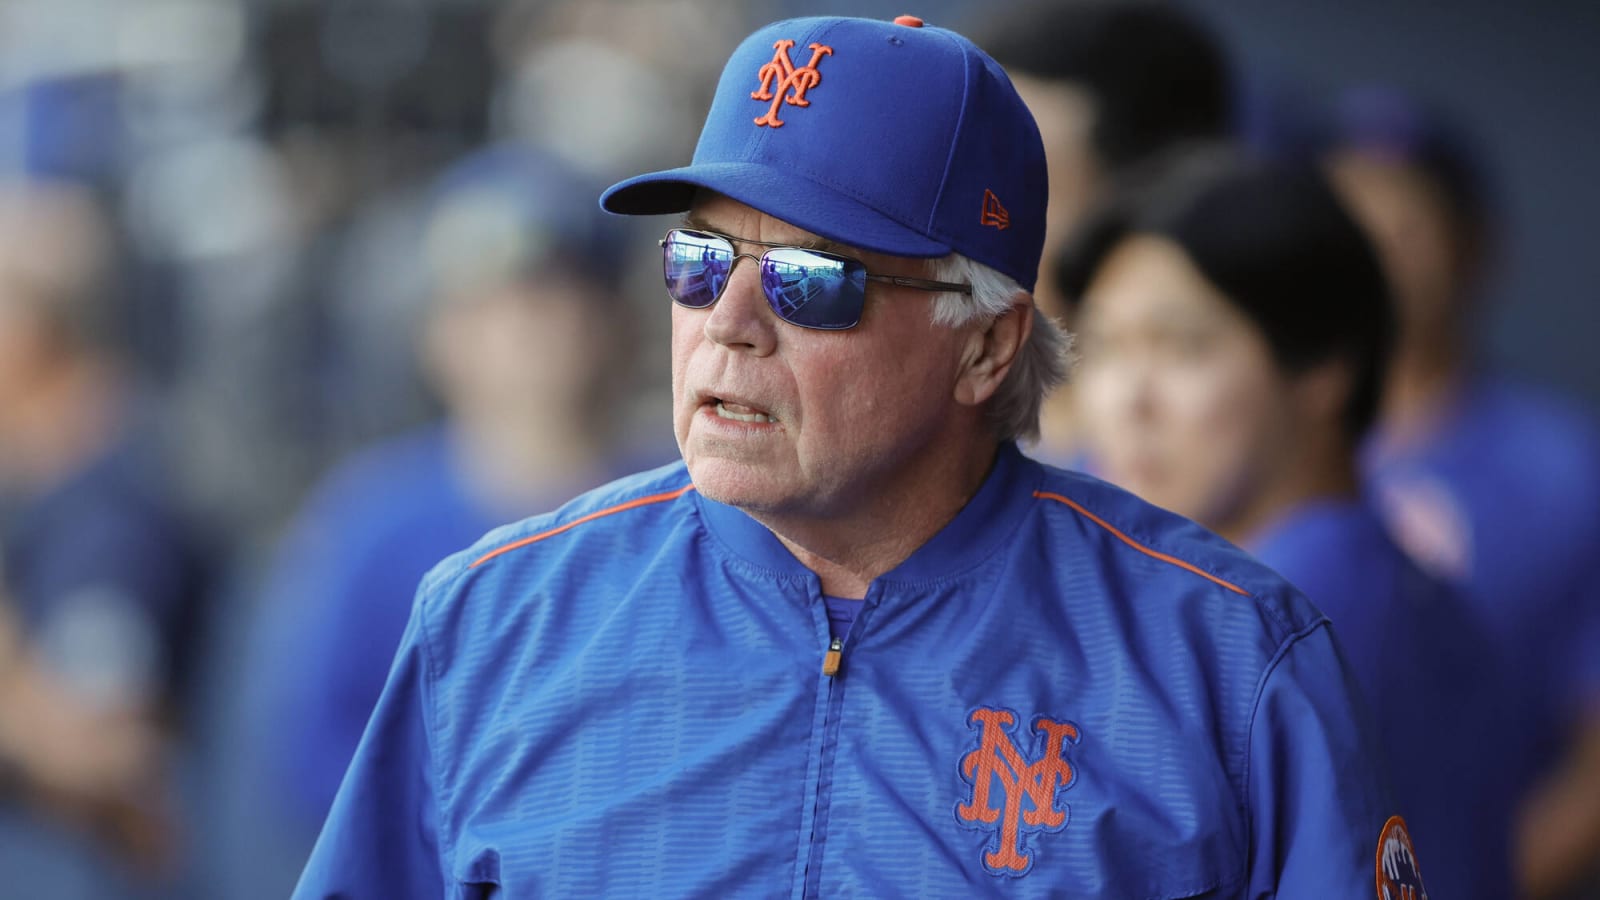 Ignore the doom and gloom, the Mets are going to be fine